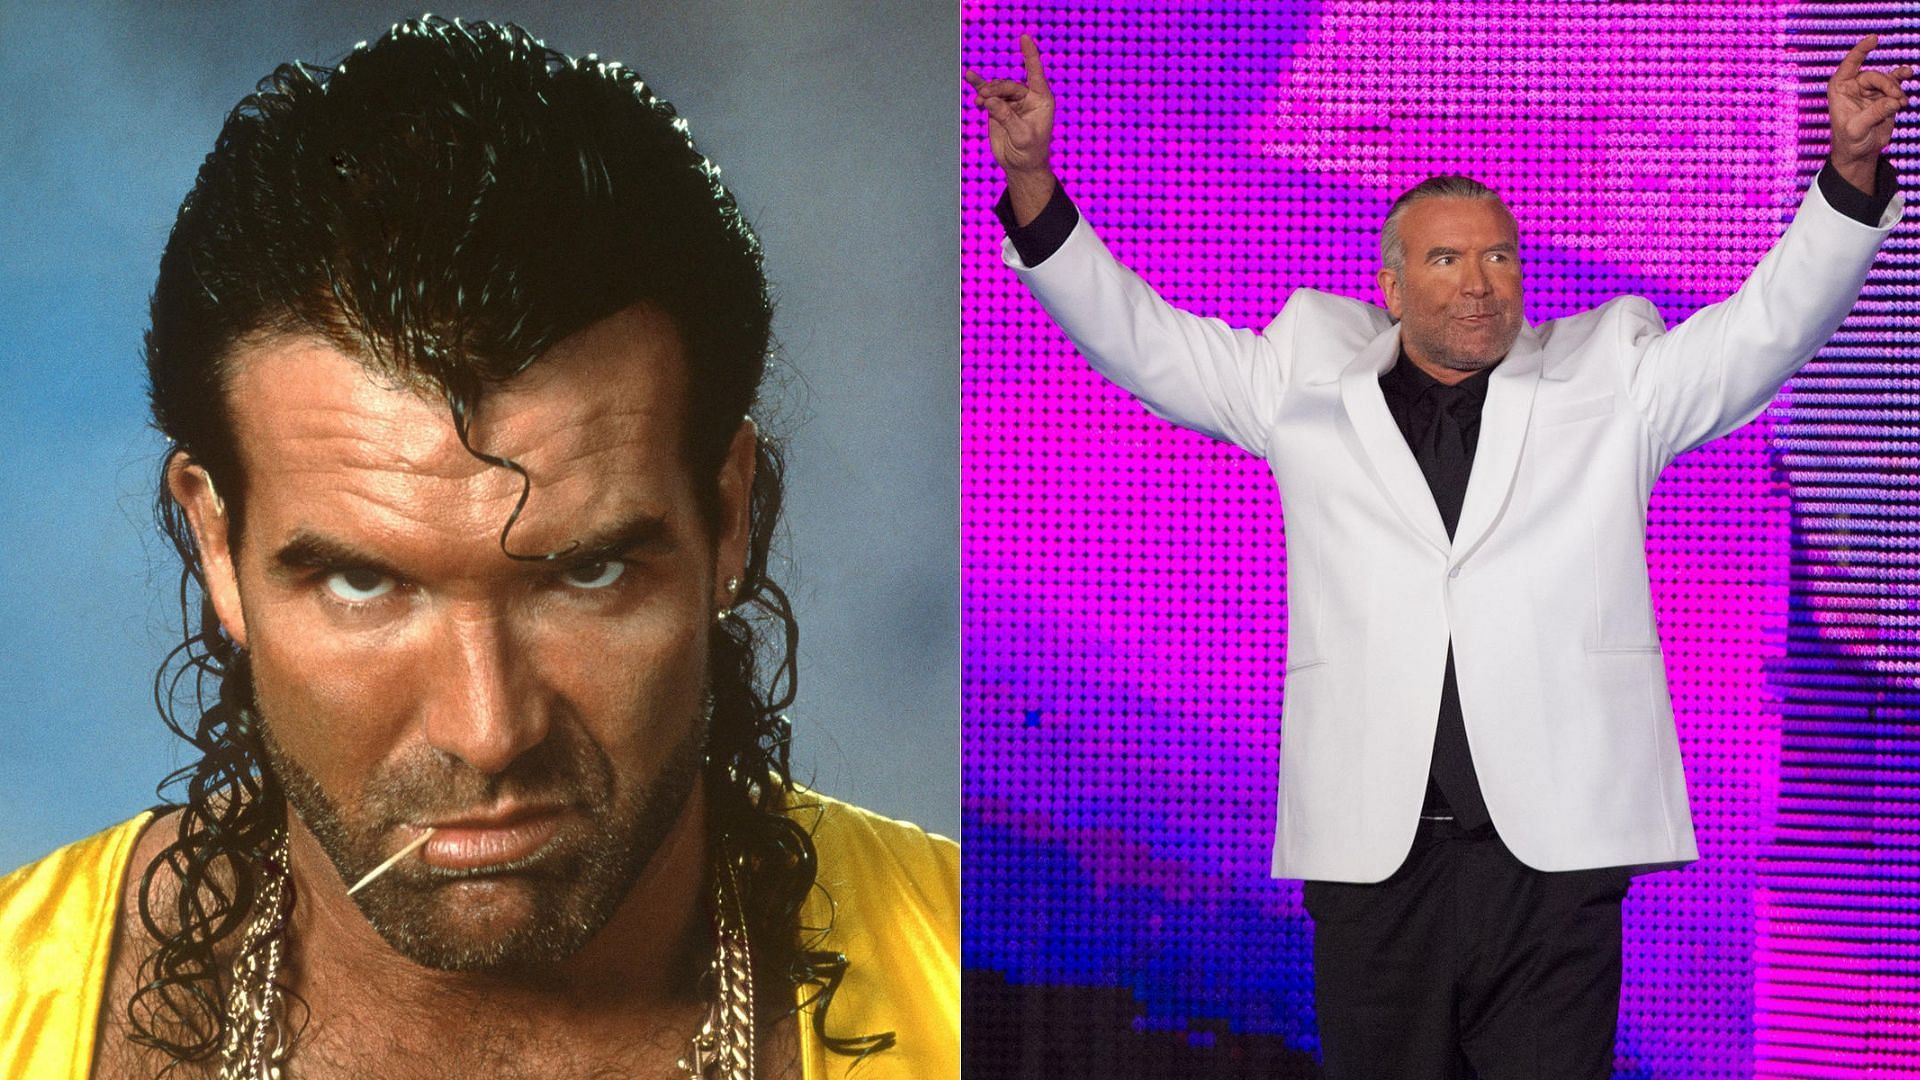 Scott Hall had troubles away from the ring after his career ended.